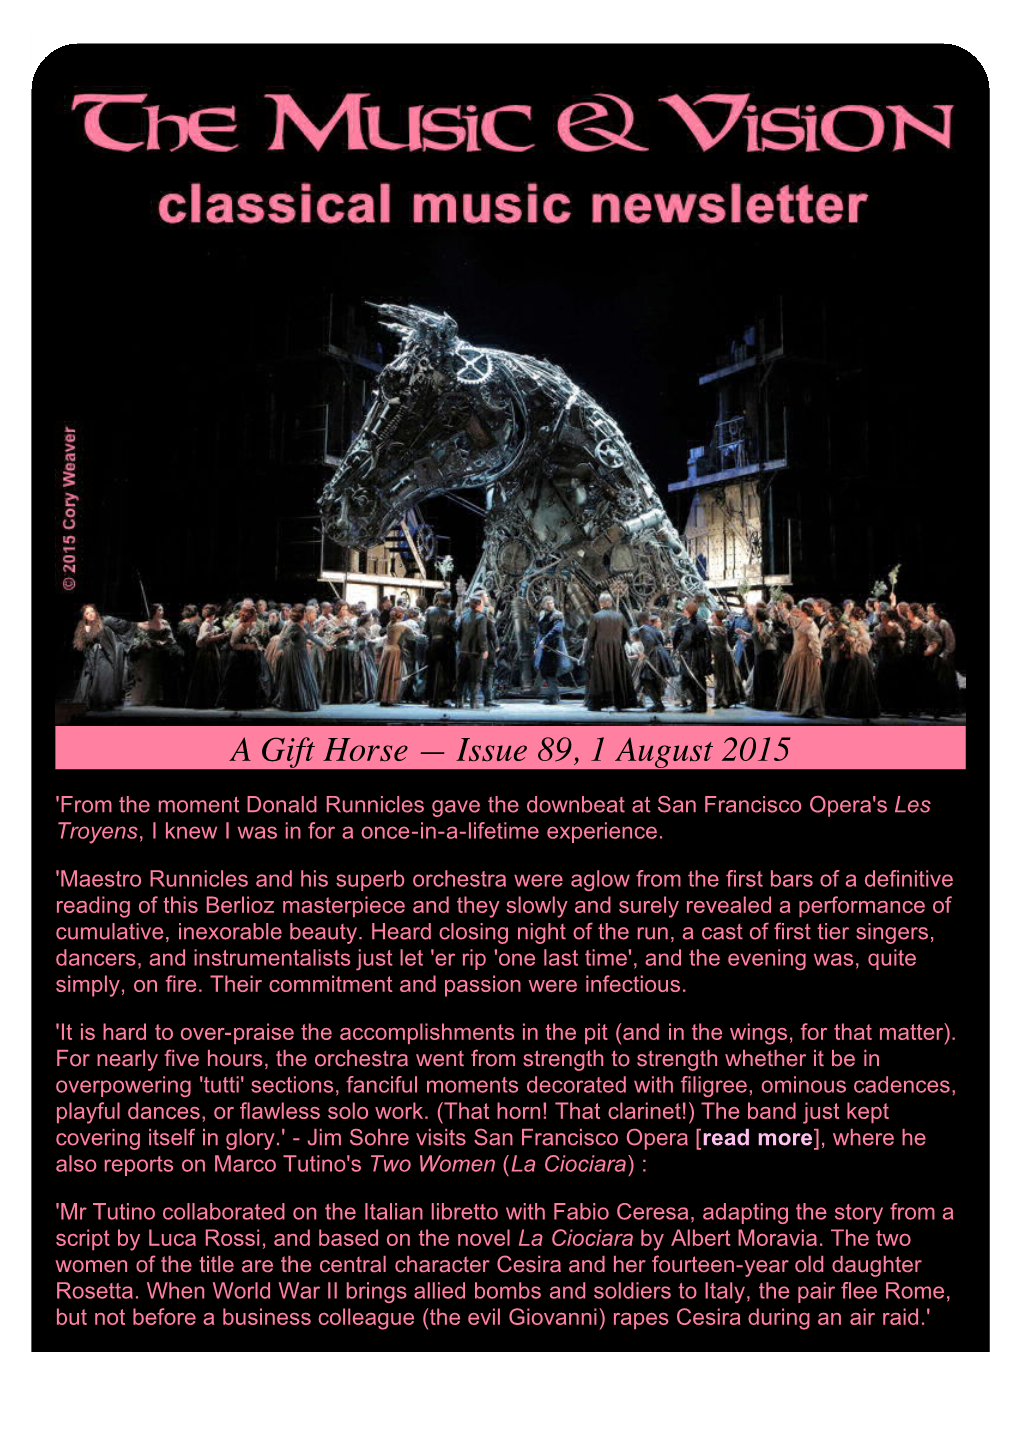 A Gift Horse — Issue 89, 1 August 2015